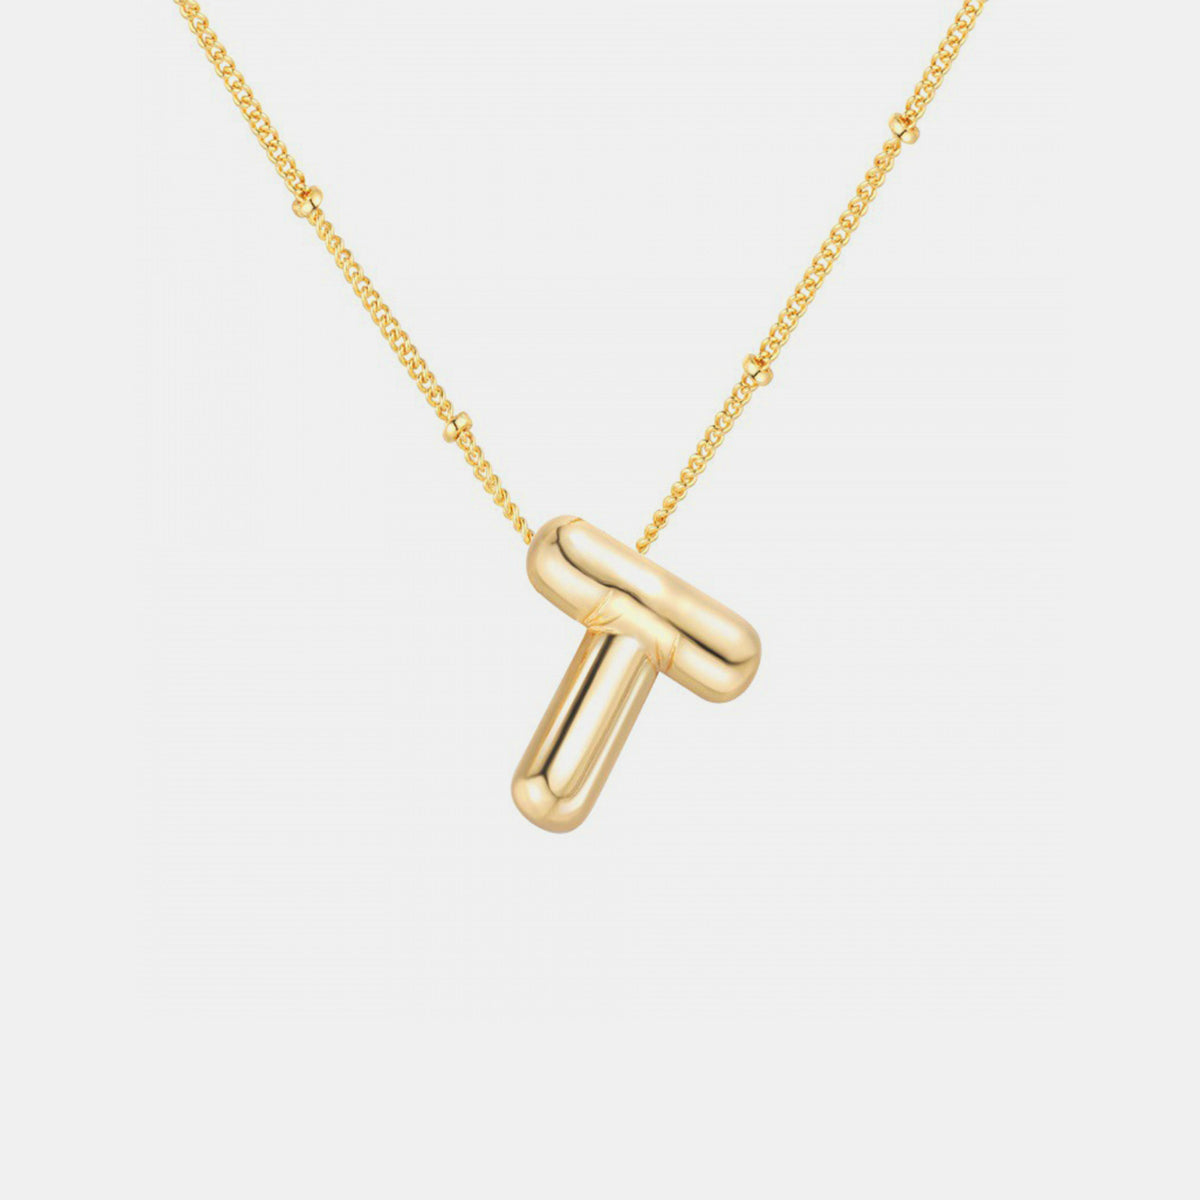 Gold-Plated Letter Pendant Necklace  TEEK Trend Style T One Size 